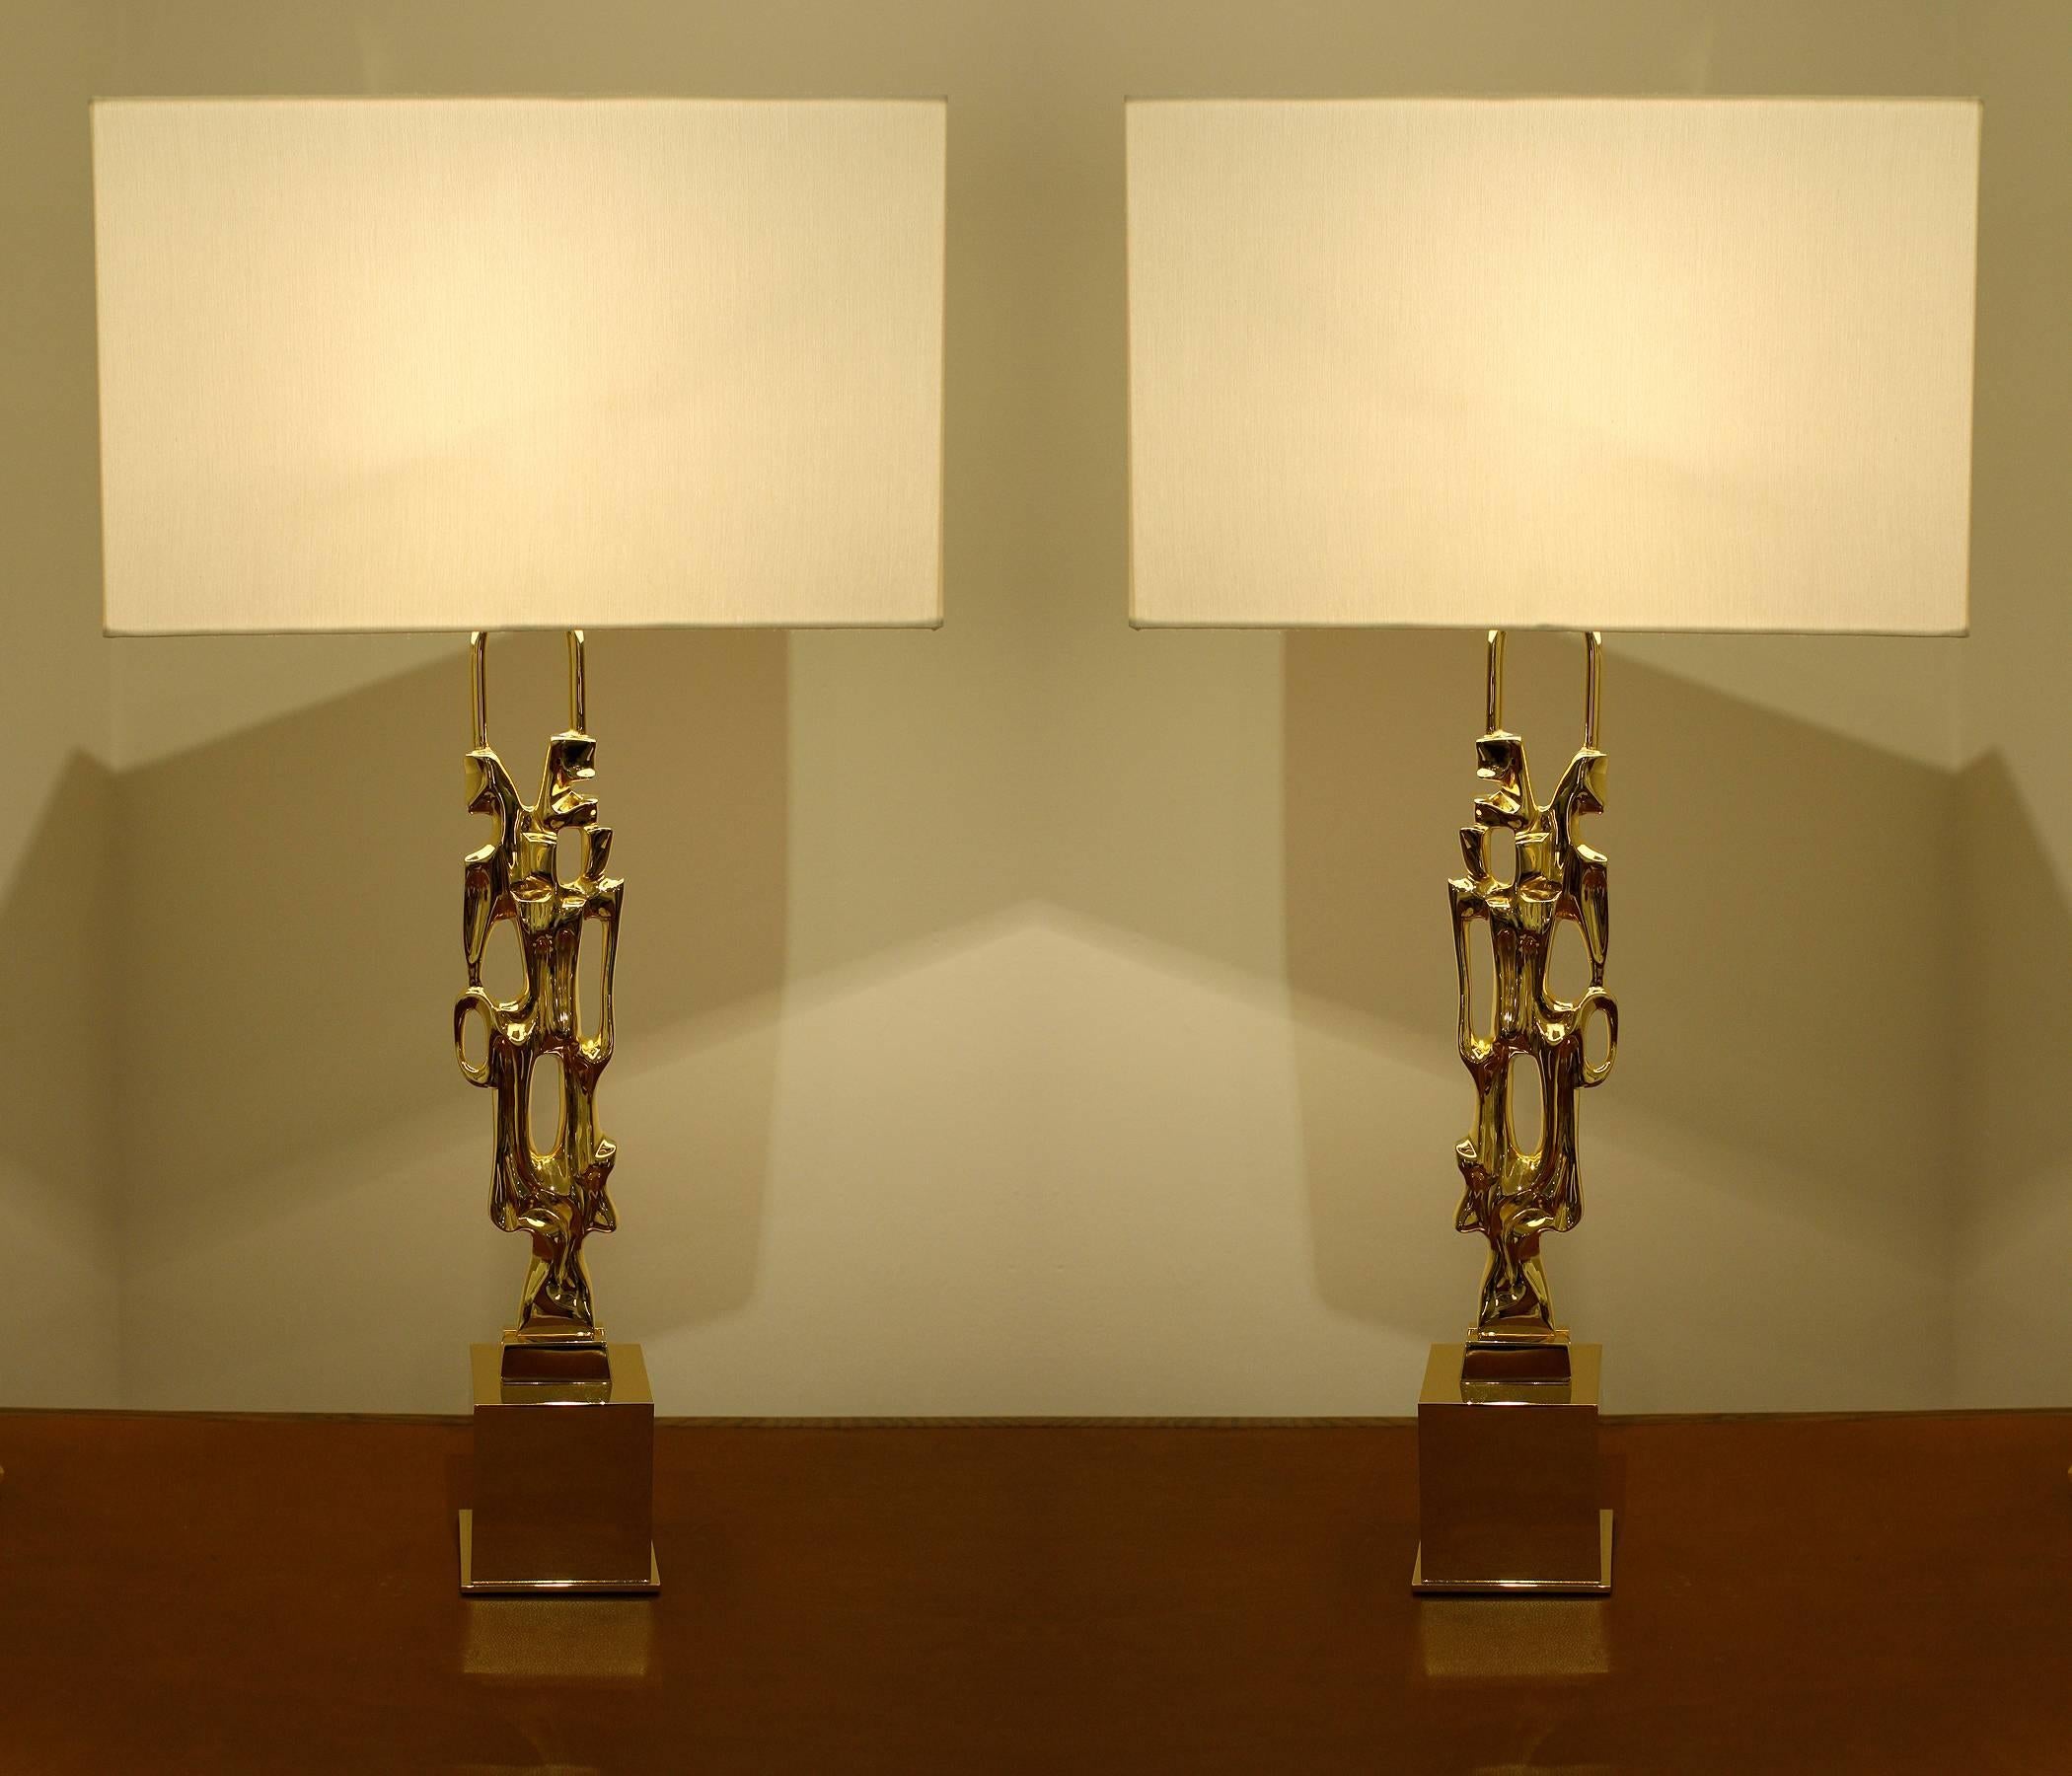 Pair of signed gilt bronze table lamps, signed Ph. Glapineau, active in the 1970s.
Heavily gilded, newly gilded. Wired for US, Candelabra socket.
Custom-made ivory silk pongee lampshade.
Measures: H 30